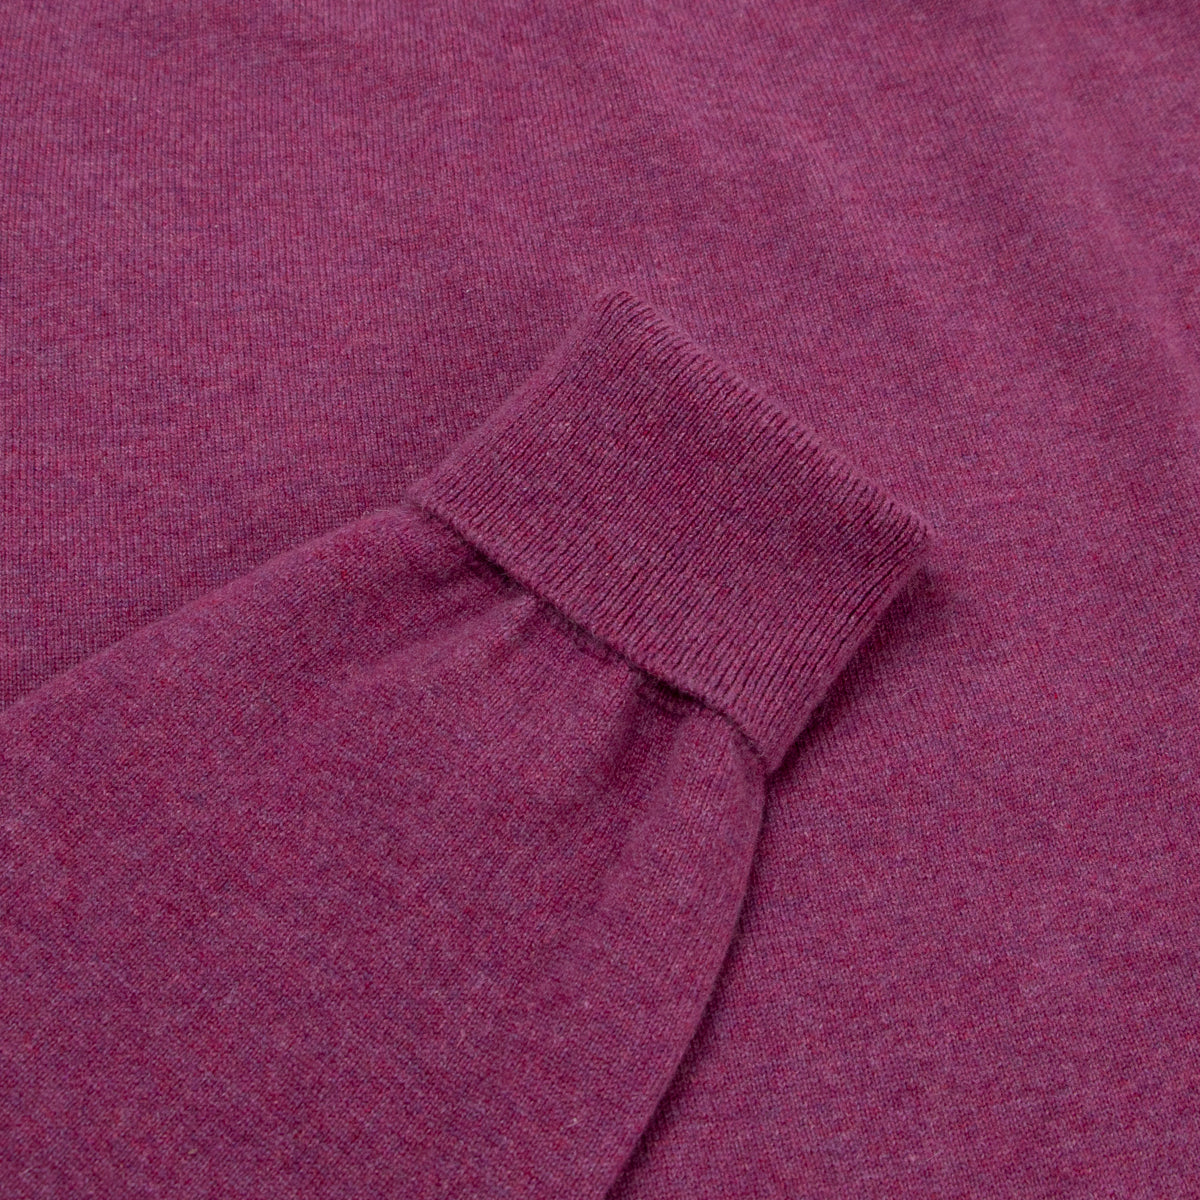 Loganberry Chatsworth 2ply V-Neck Cashmere Sweater  Robert Old   